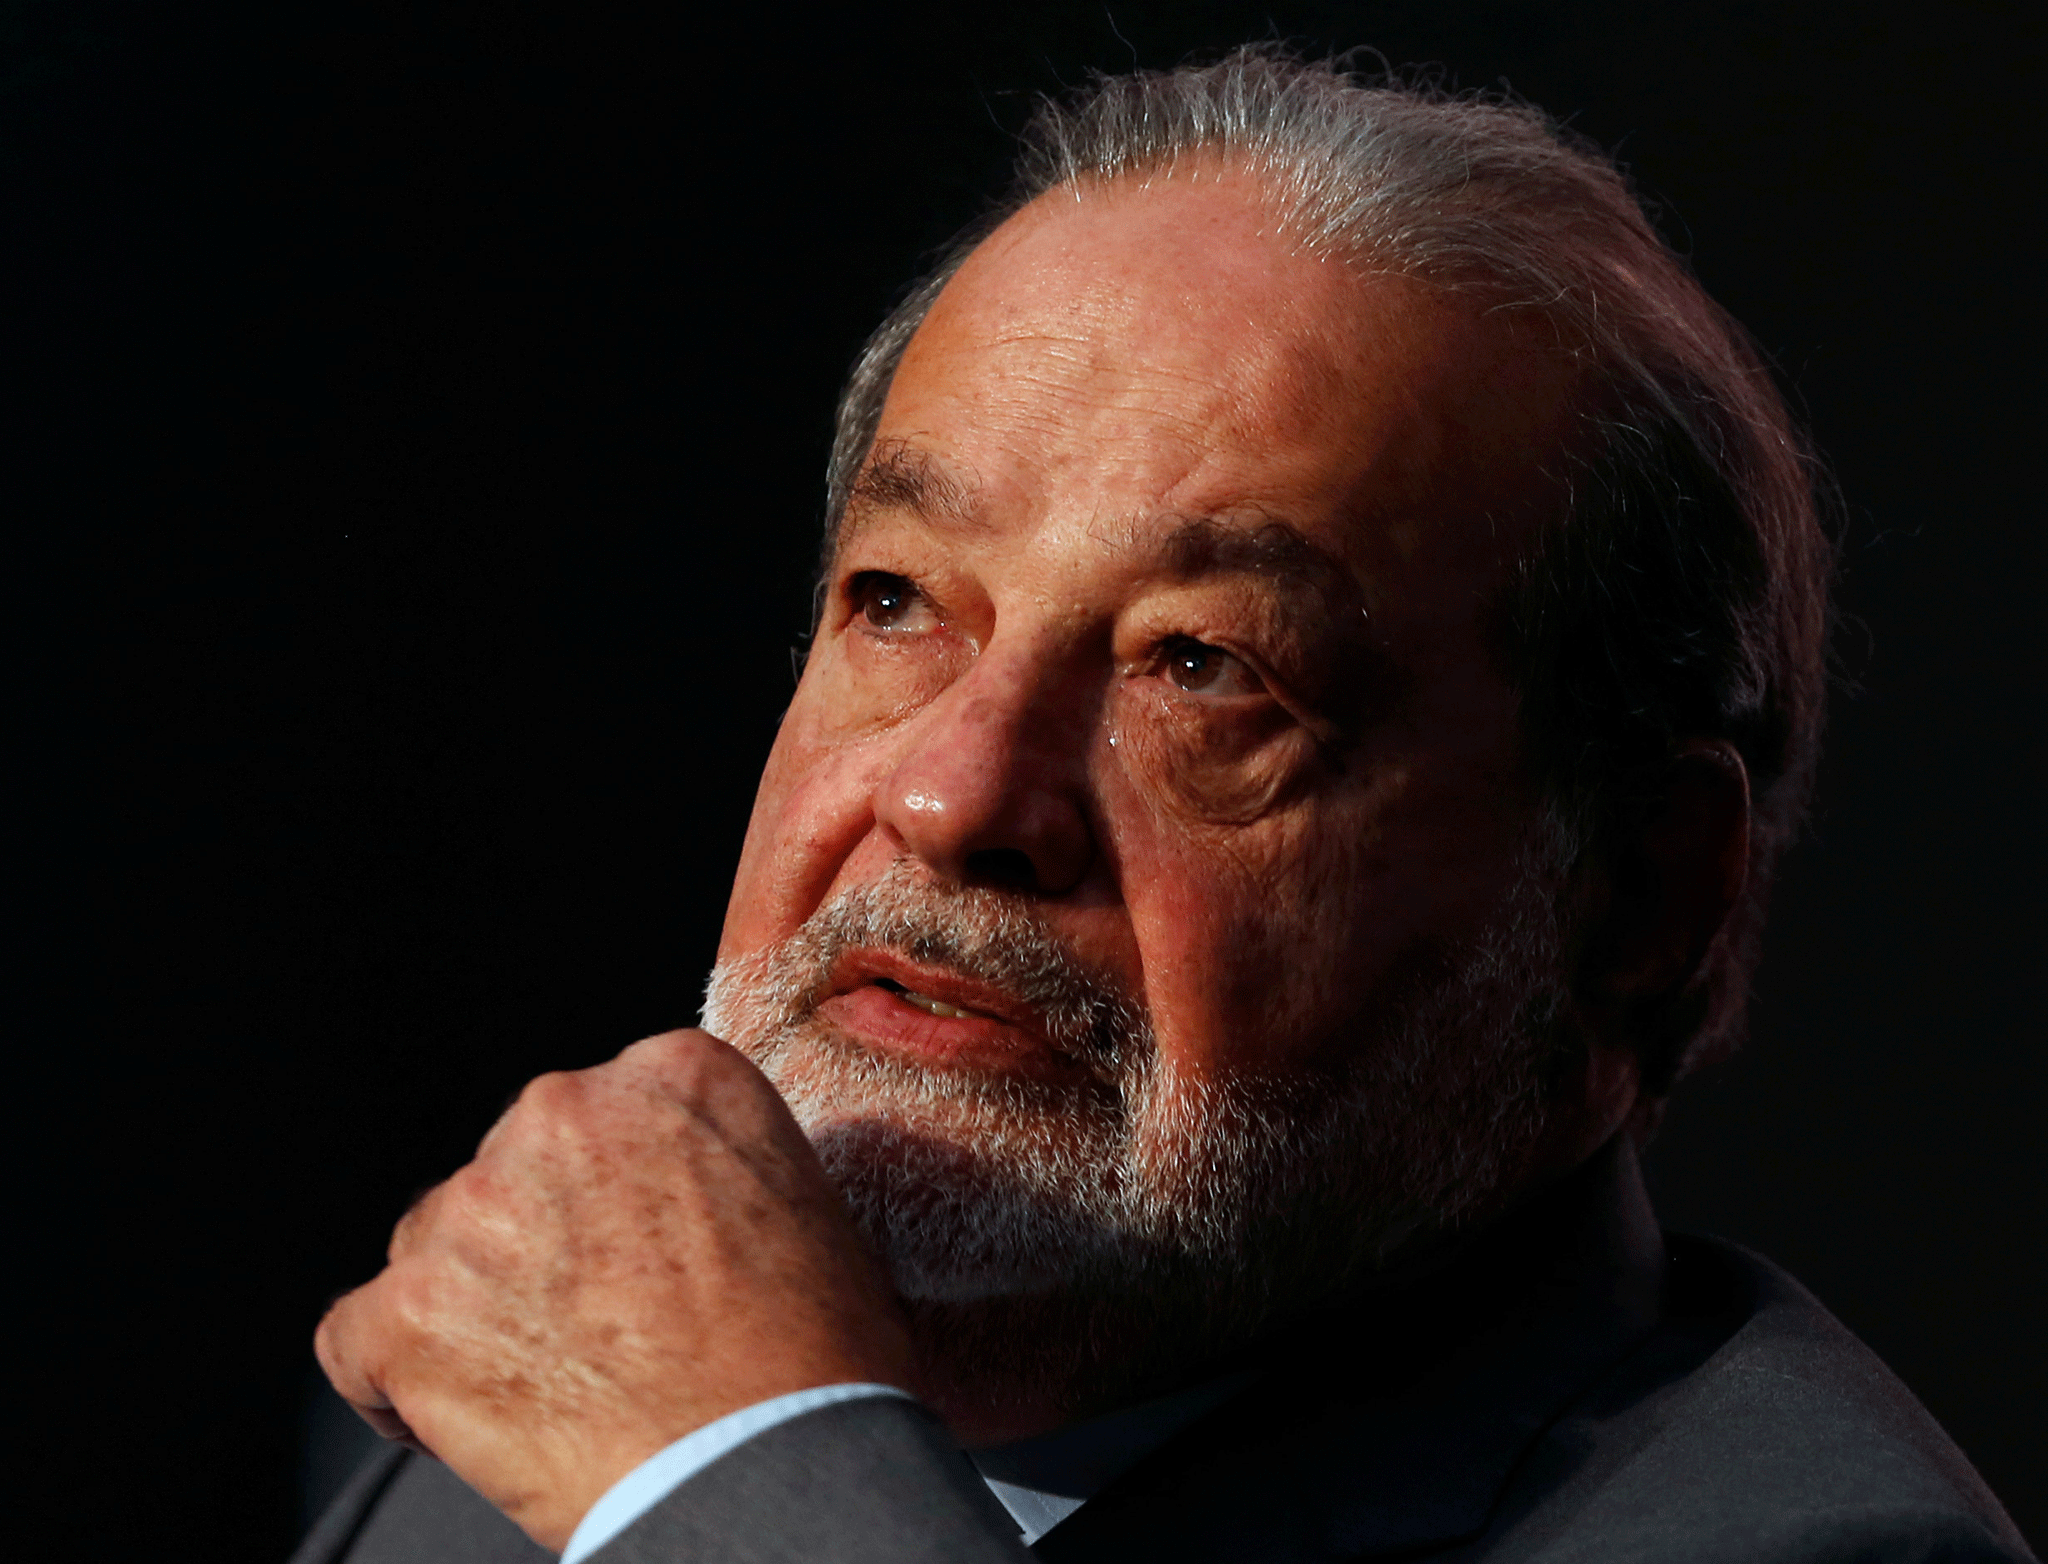 The Mexican billionaire was the richest man in the world as recently as 2013